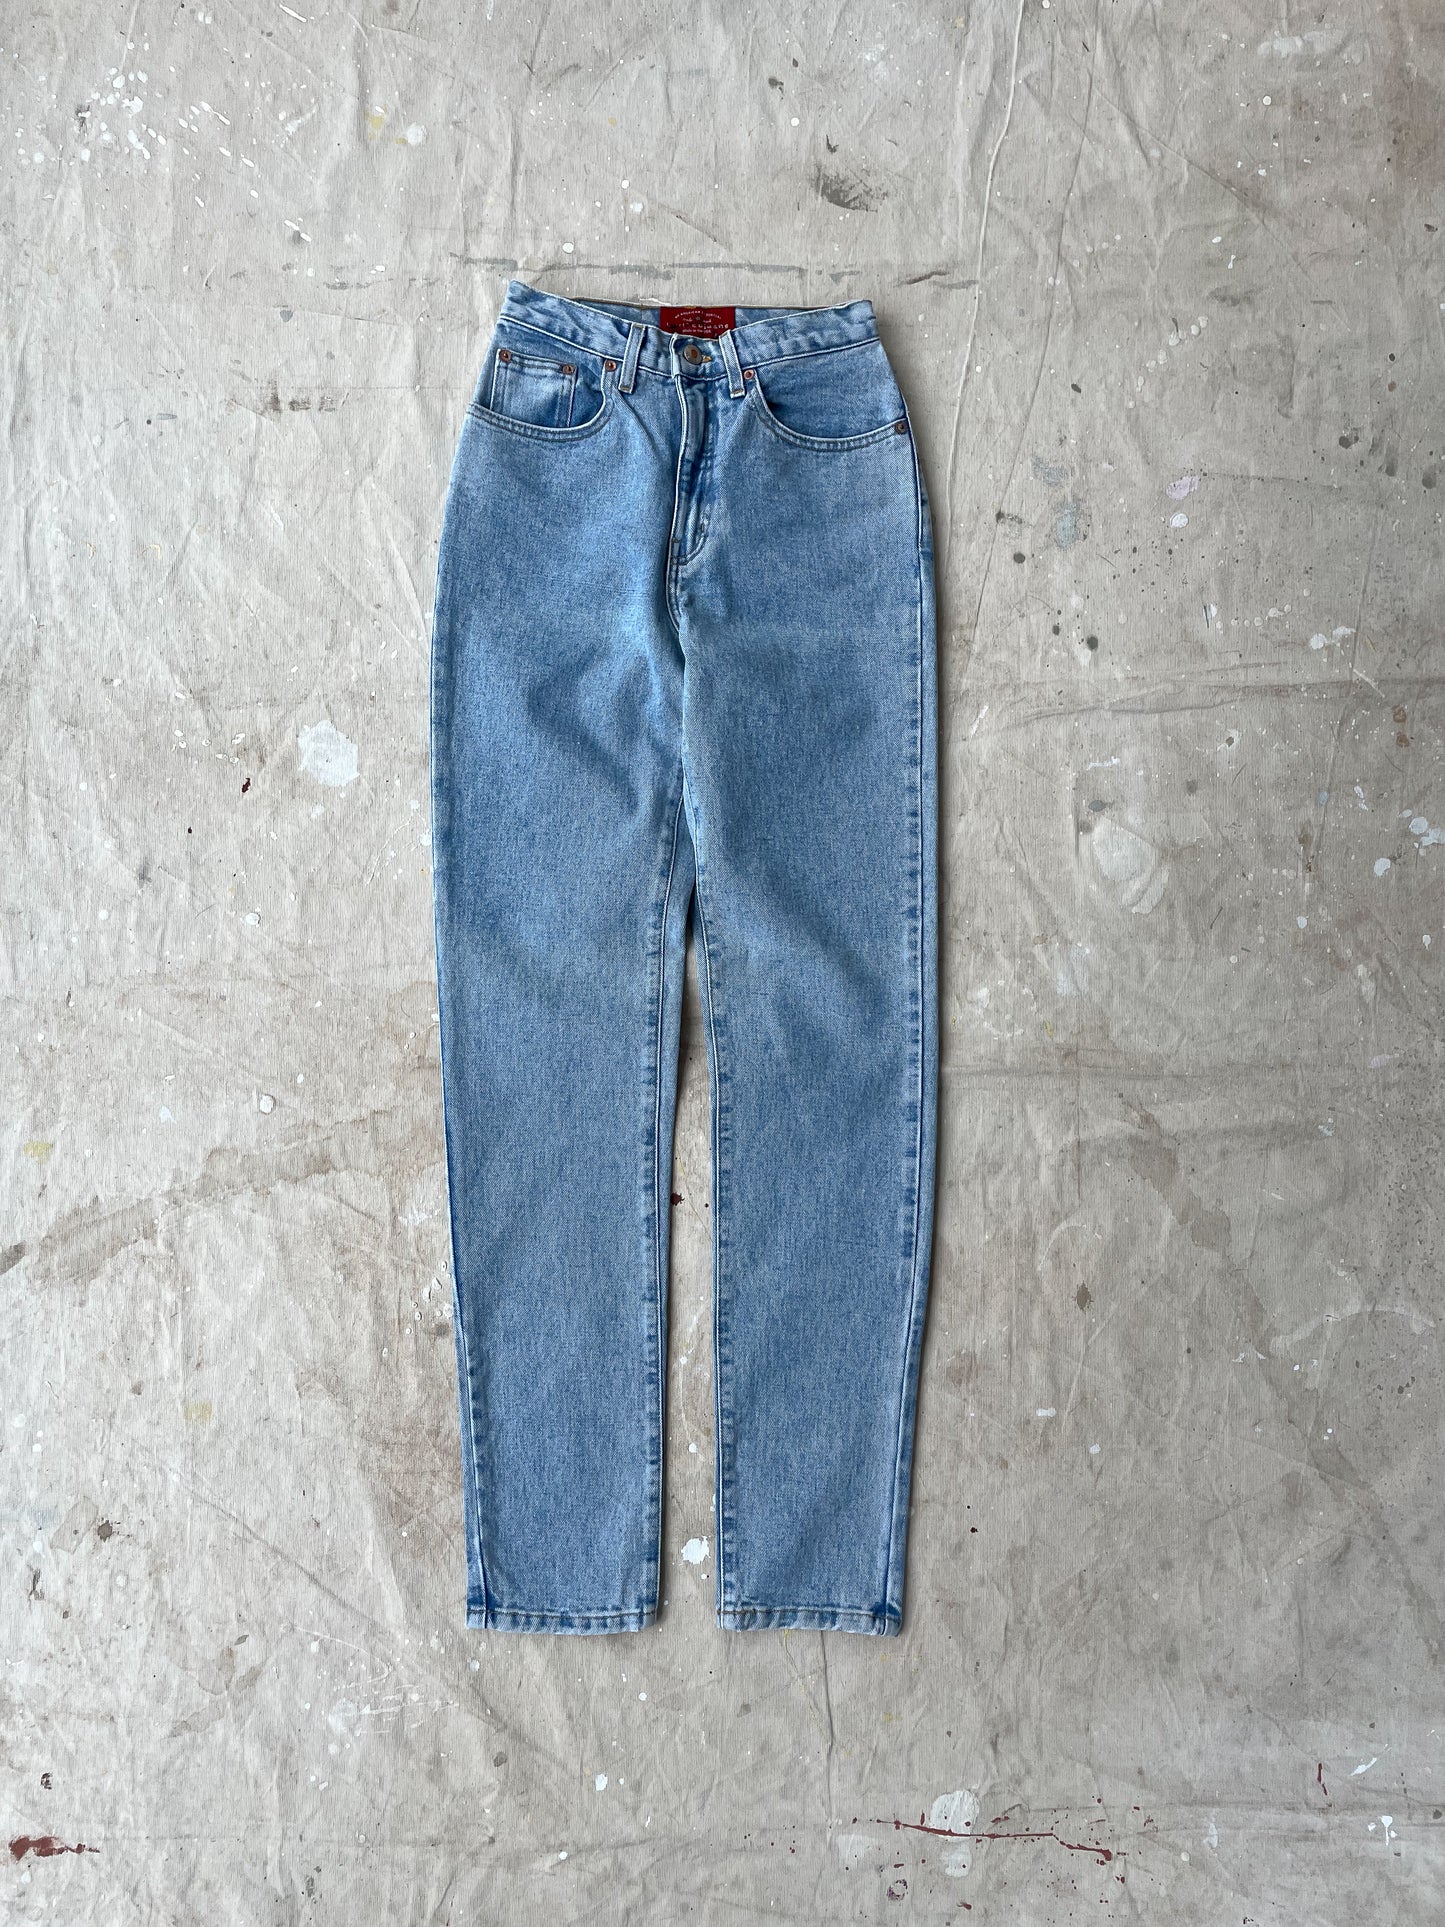 High-Rise Light Wash Jeans—[24X33]